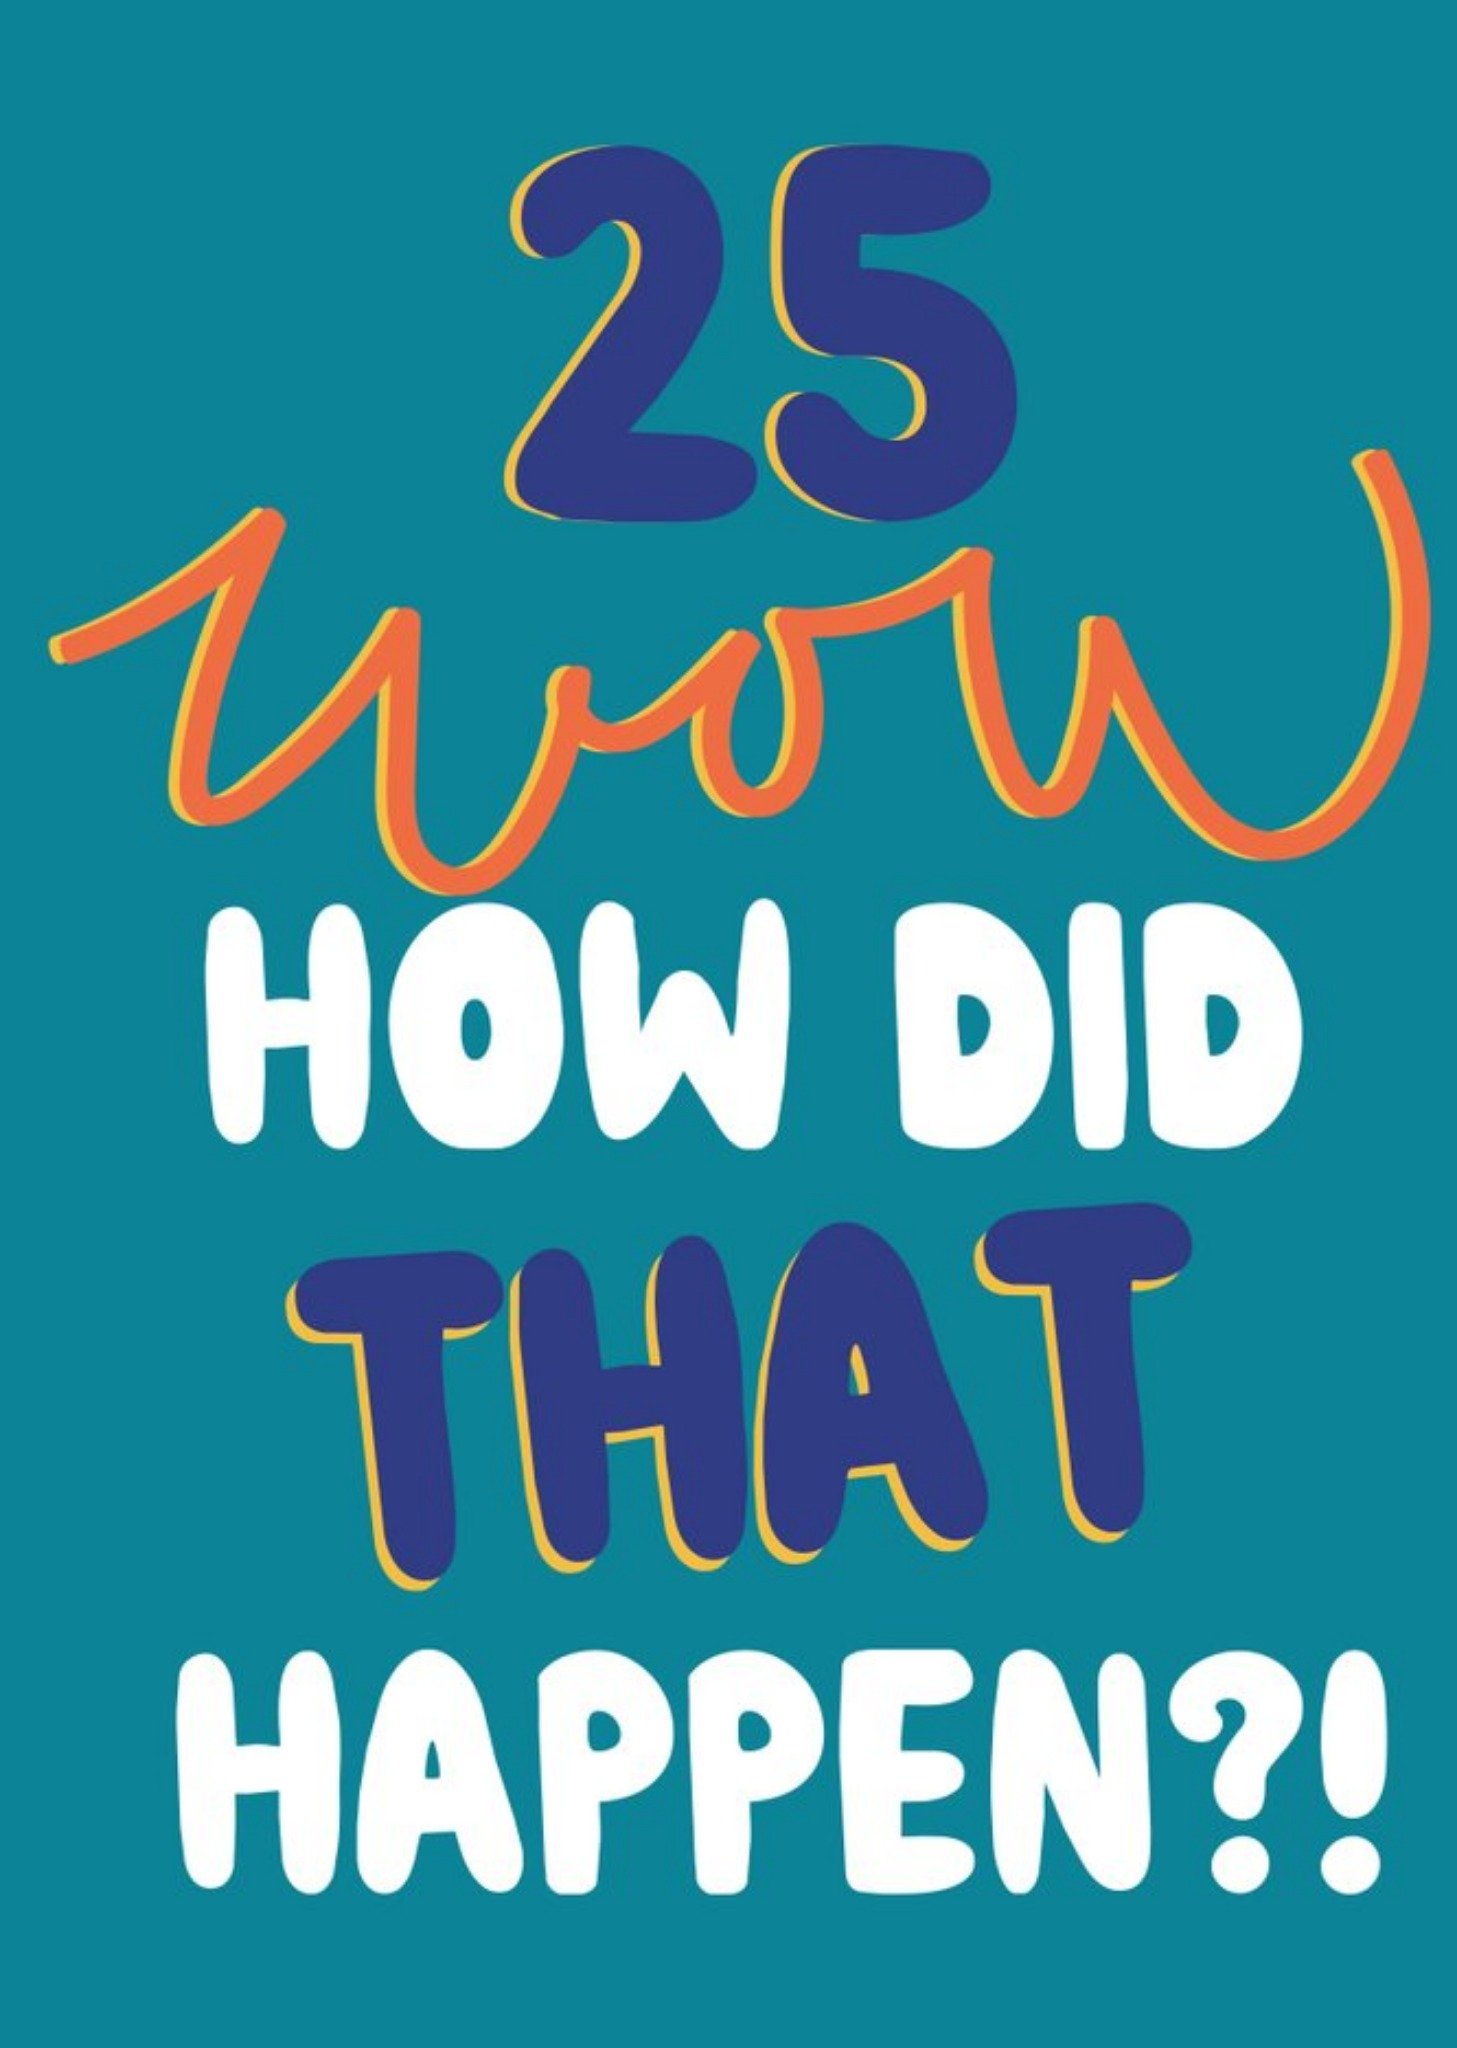 Moonpig 25 Wow How Did That Happen Bright Typographic Birthday Card, Large